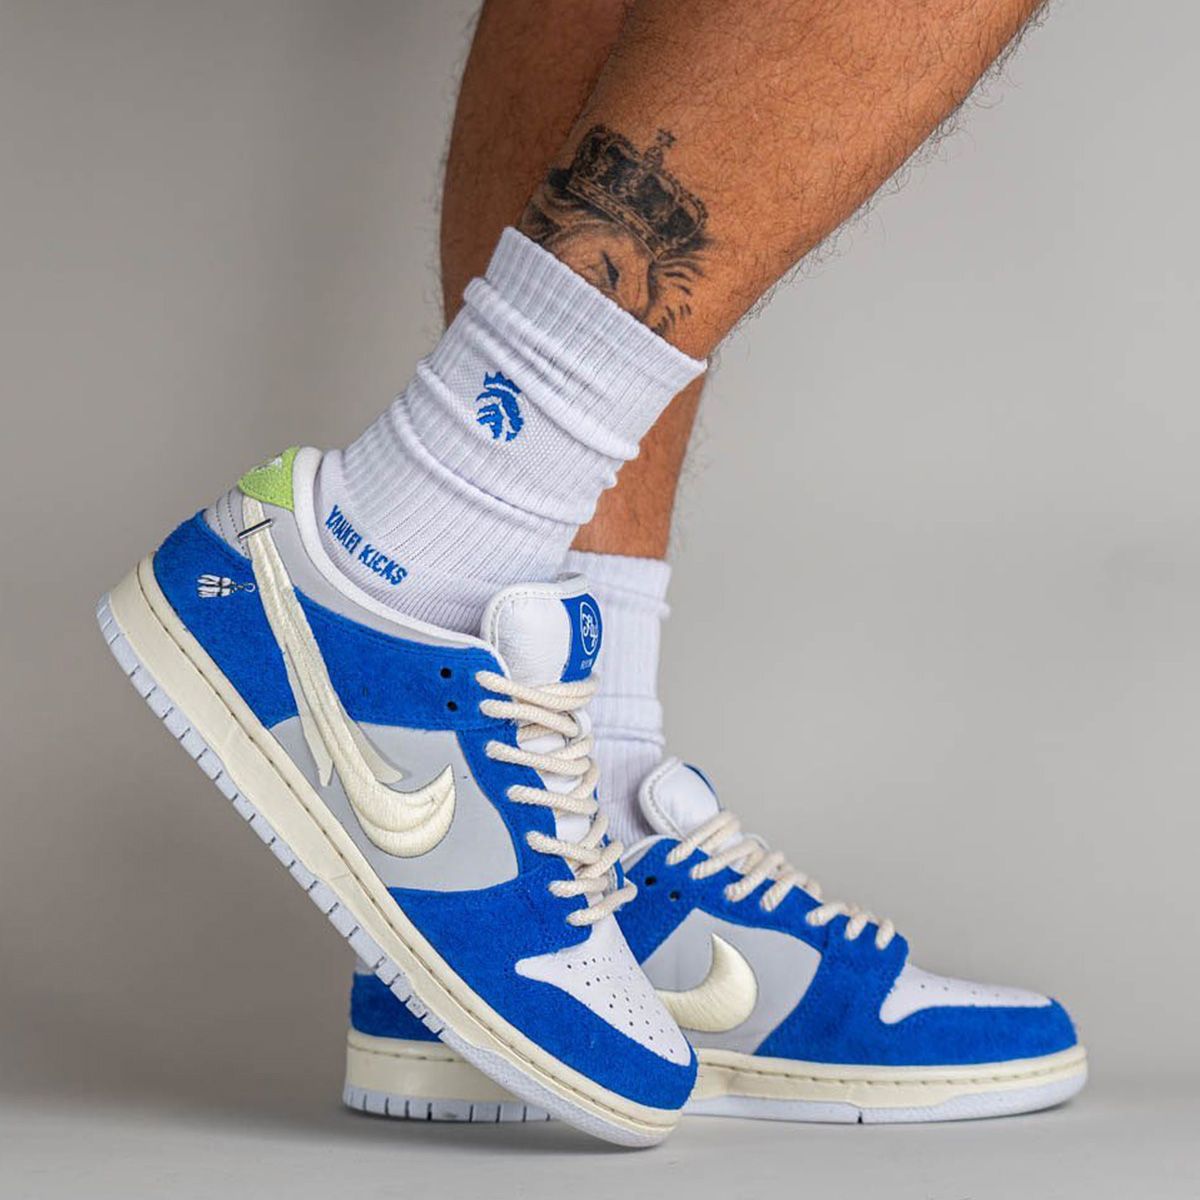 Where to Buy the Fly Streetwear x Nike SB Dunk Low | House of Heat°